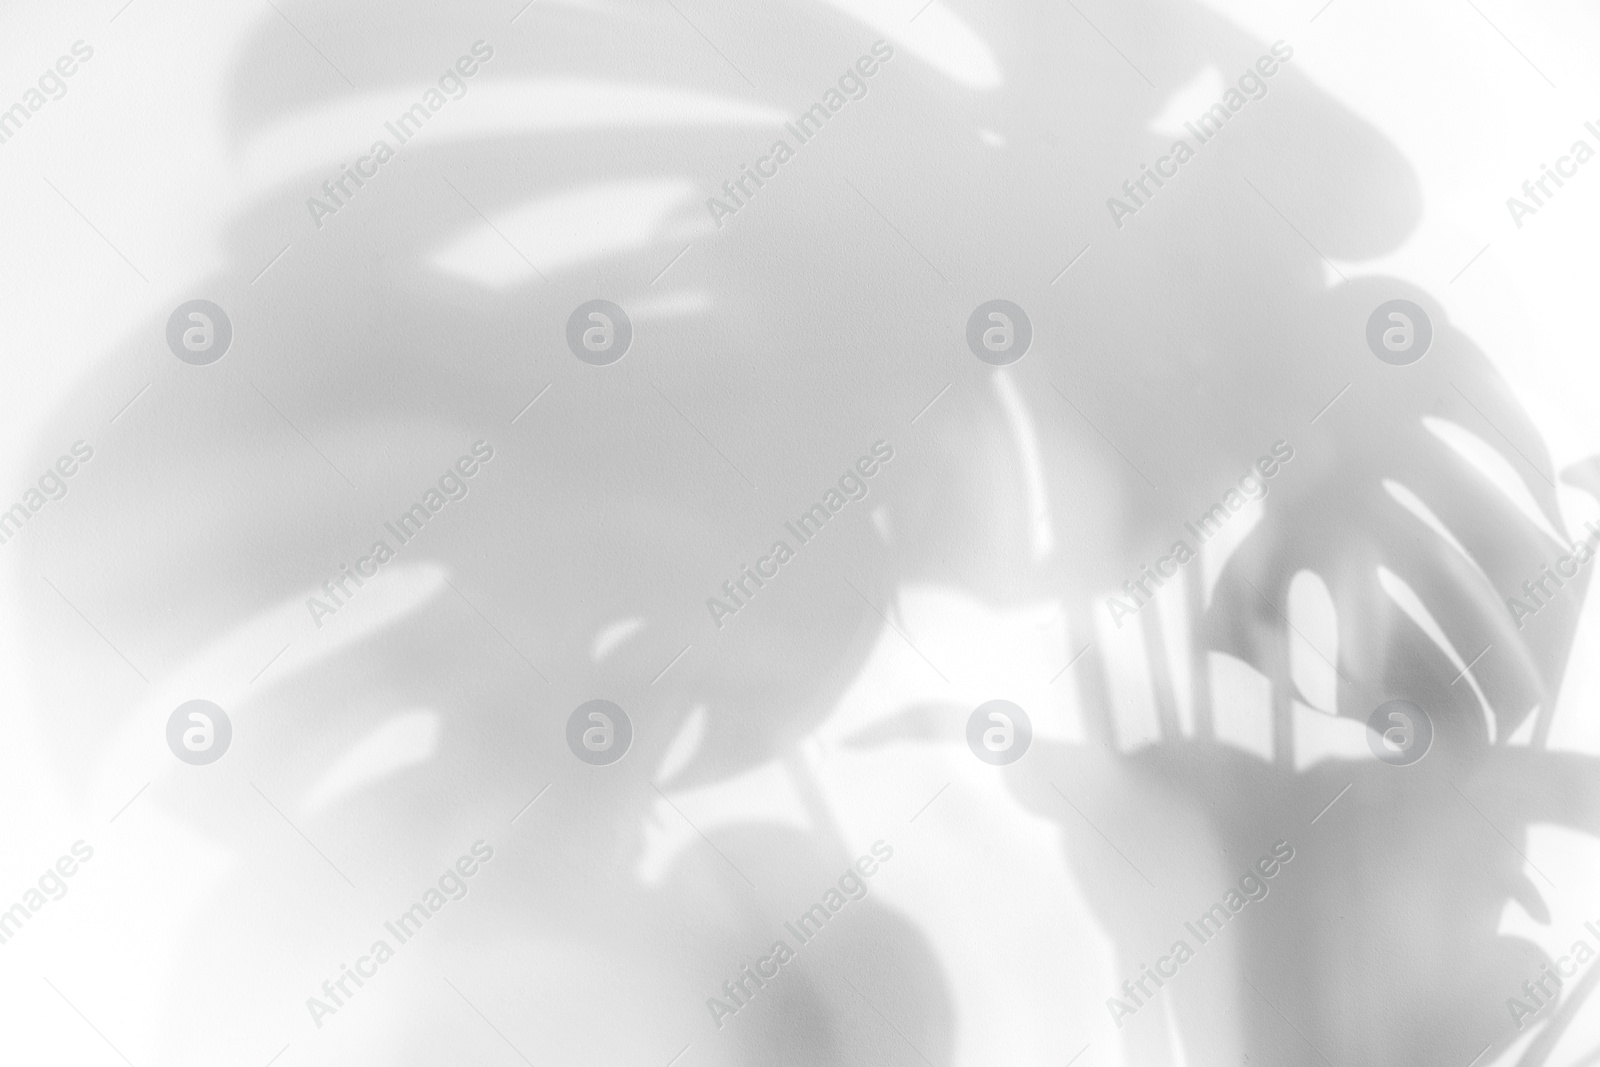 Photo of Shadow of monstera plant leaves on light background